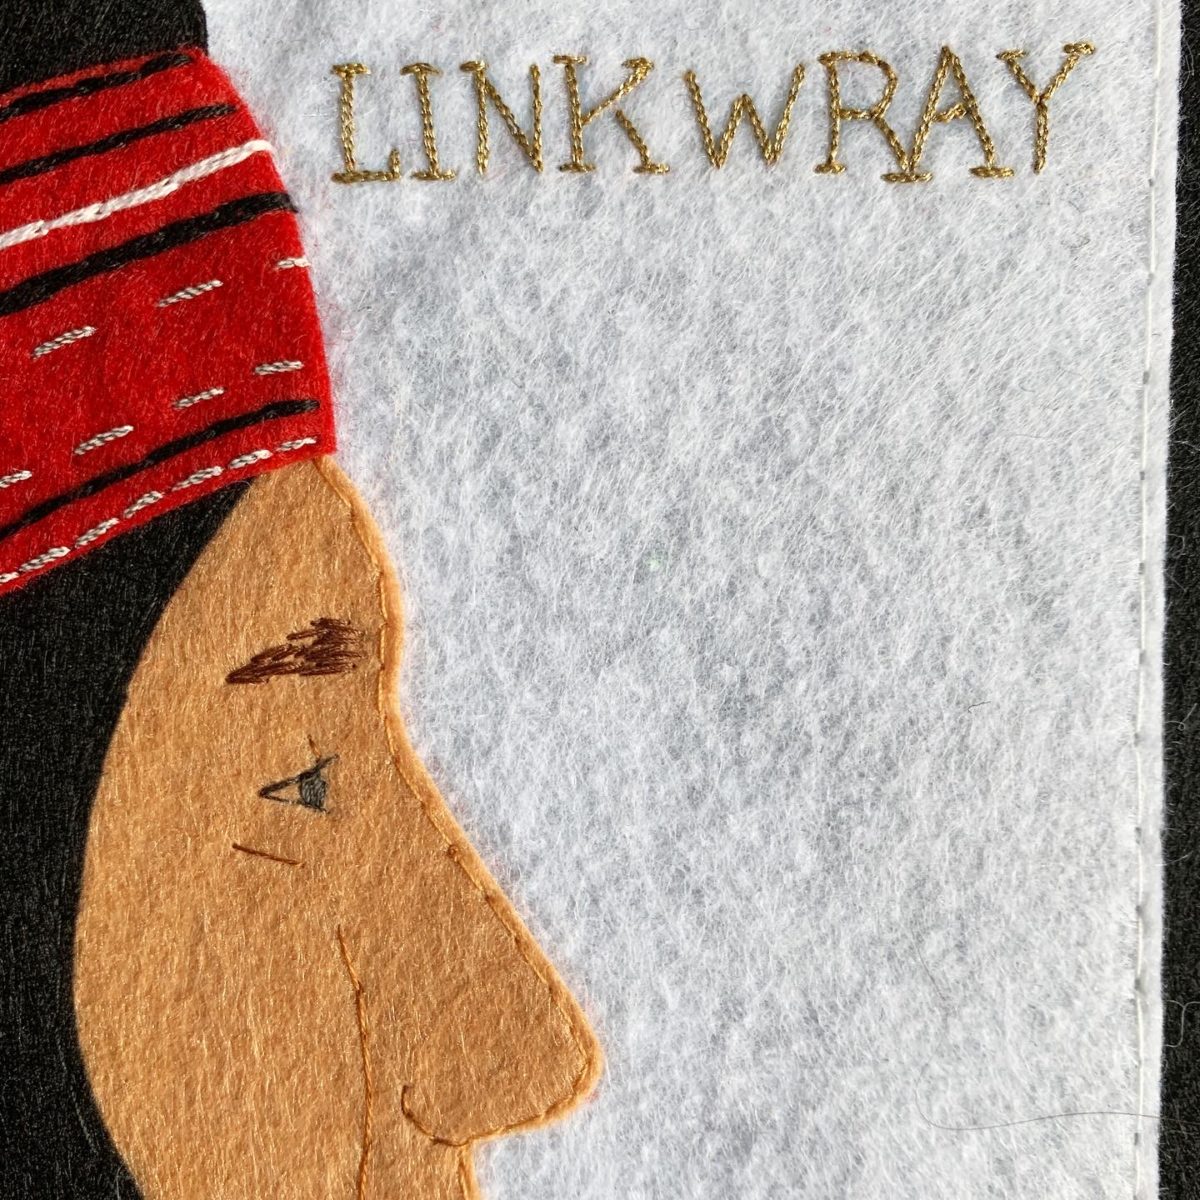 Link Wray – S/T (1971)